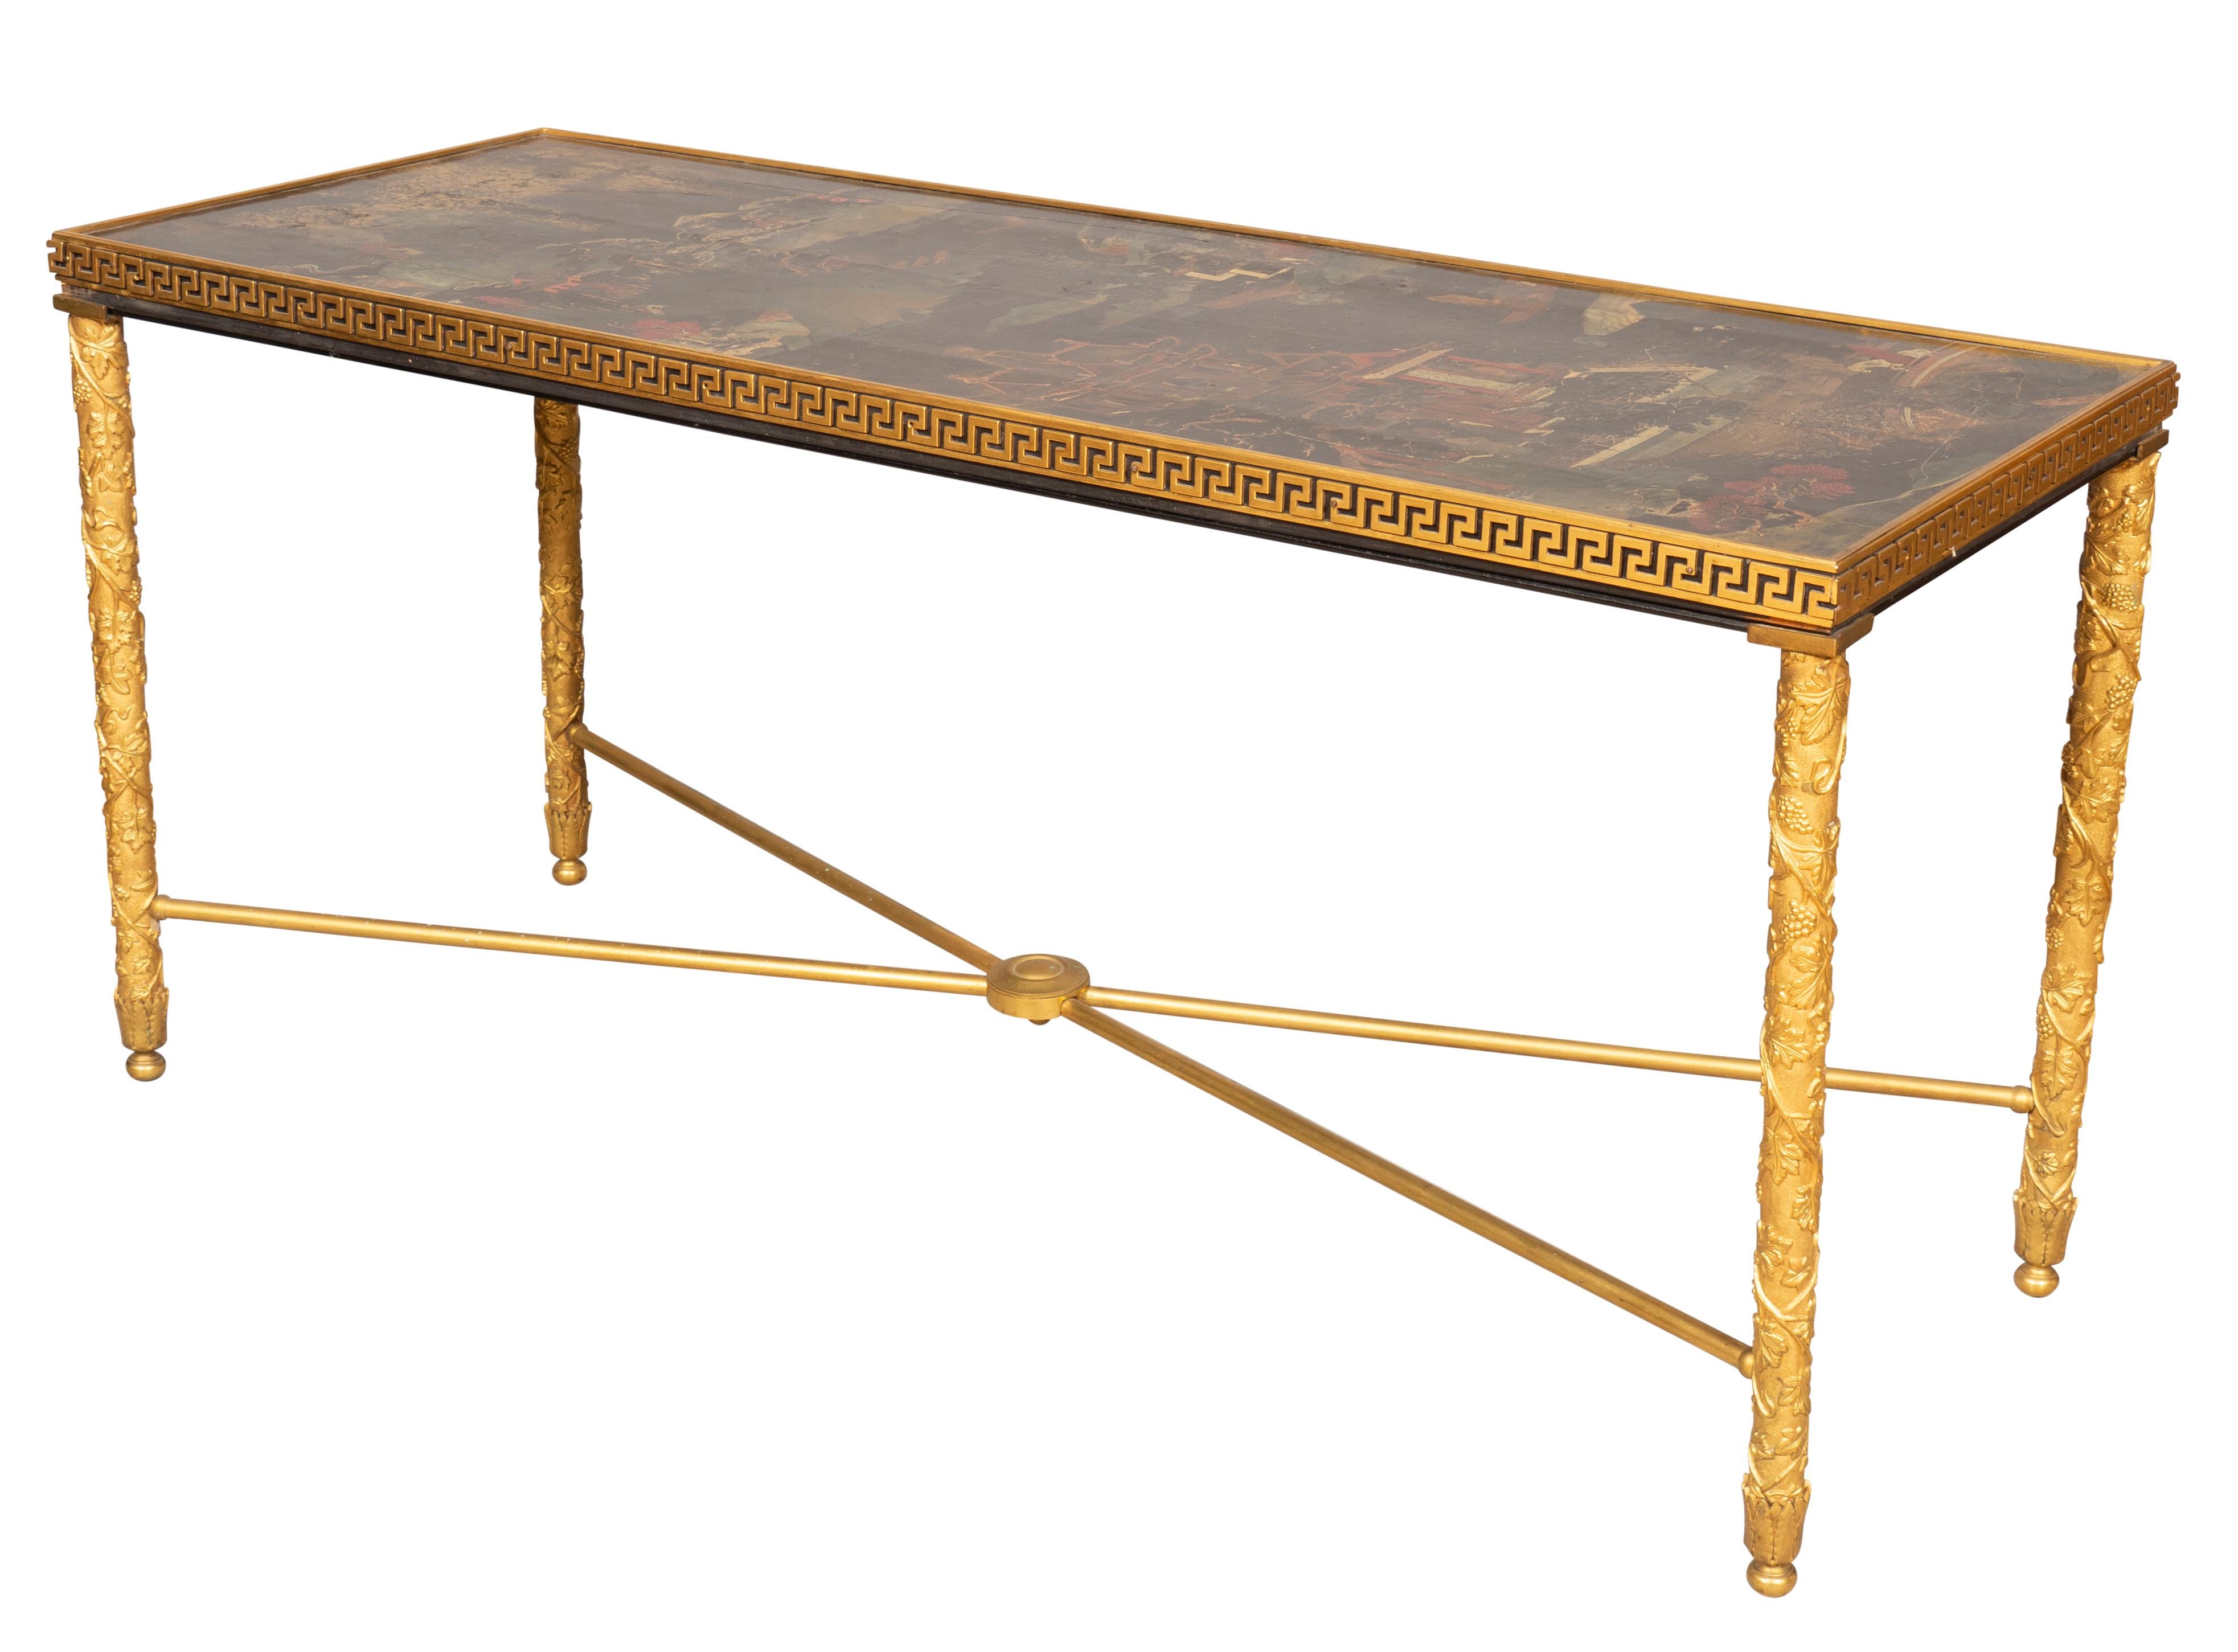 Maison Jansen Bronze and Lacquer Coffee Table 1